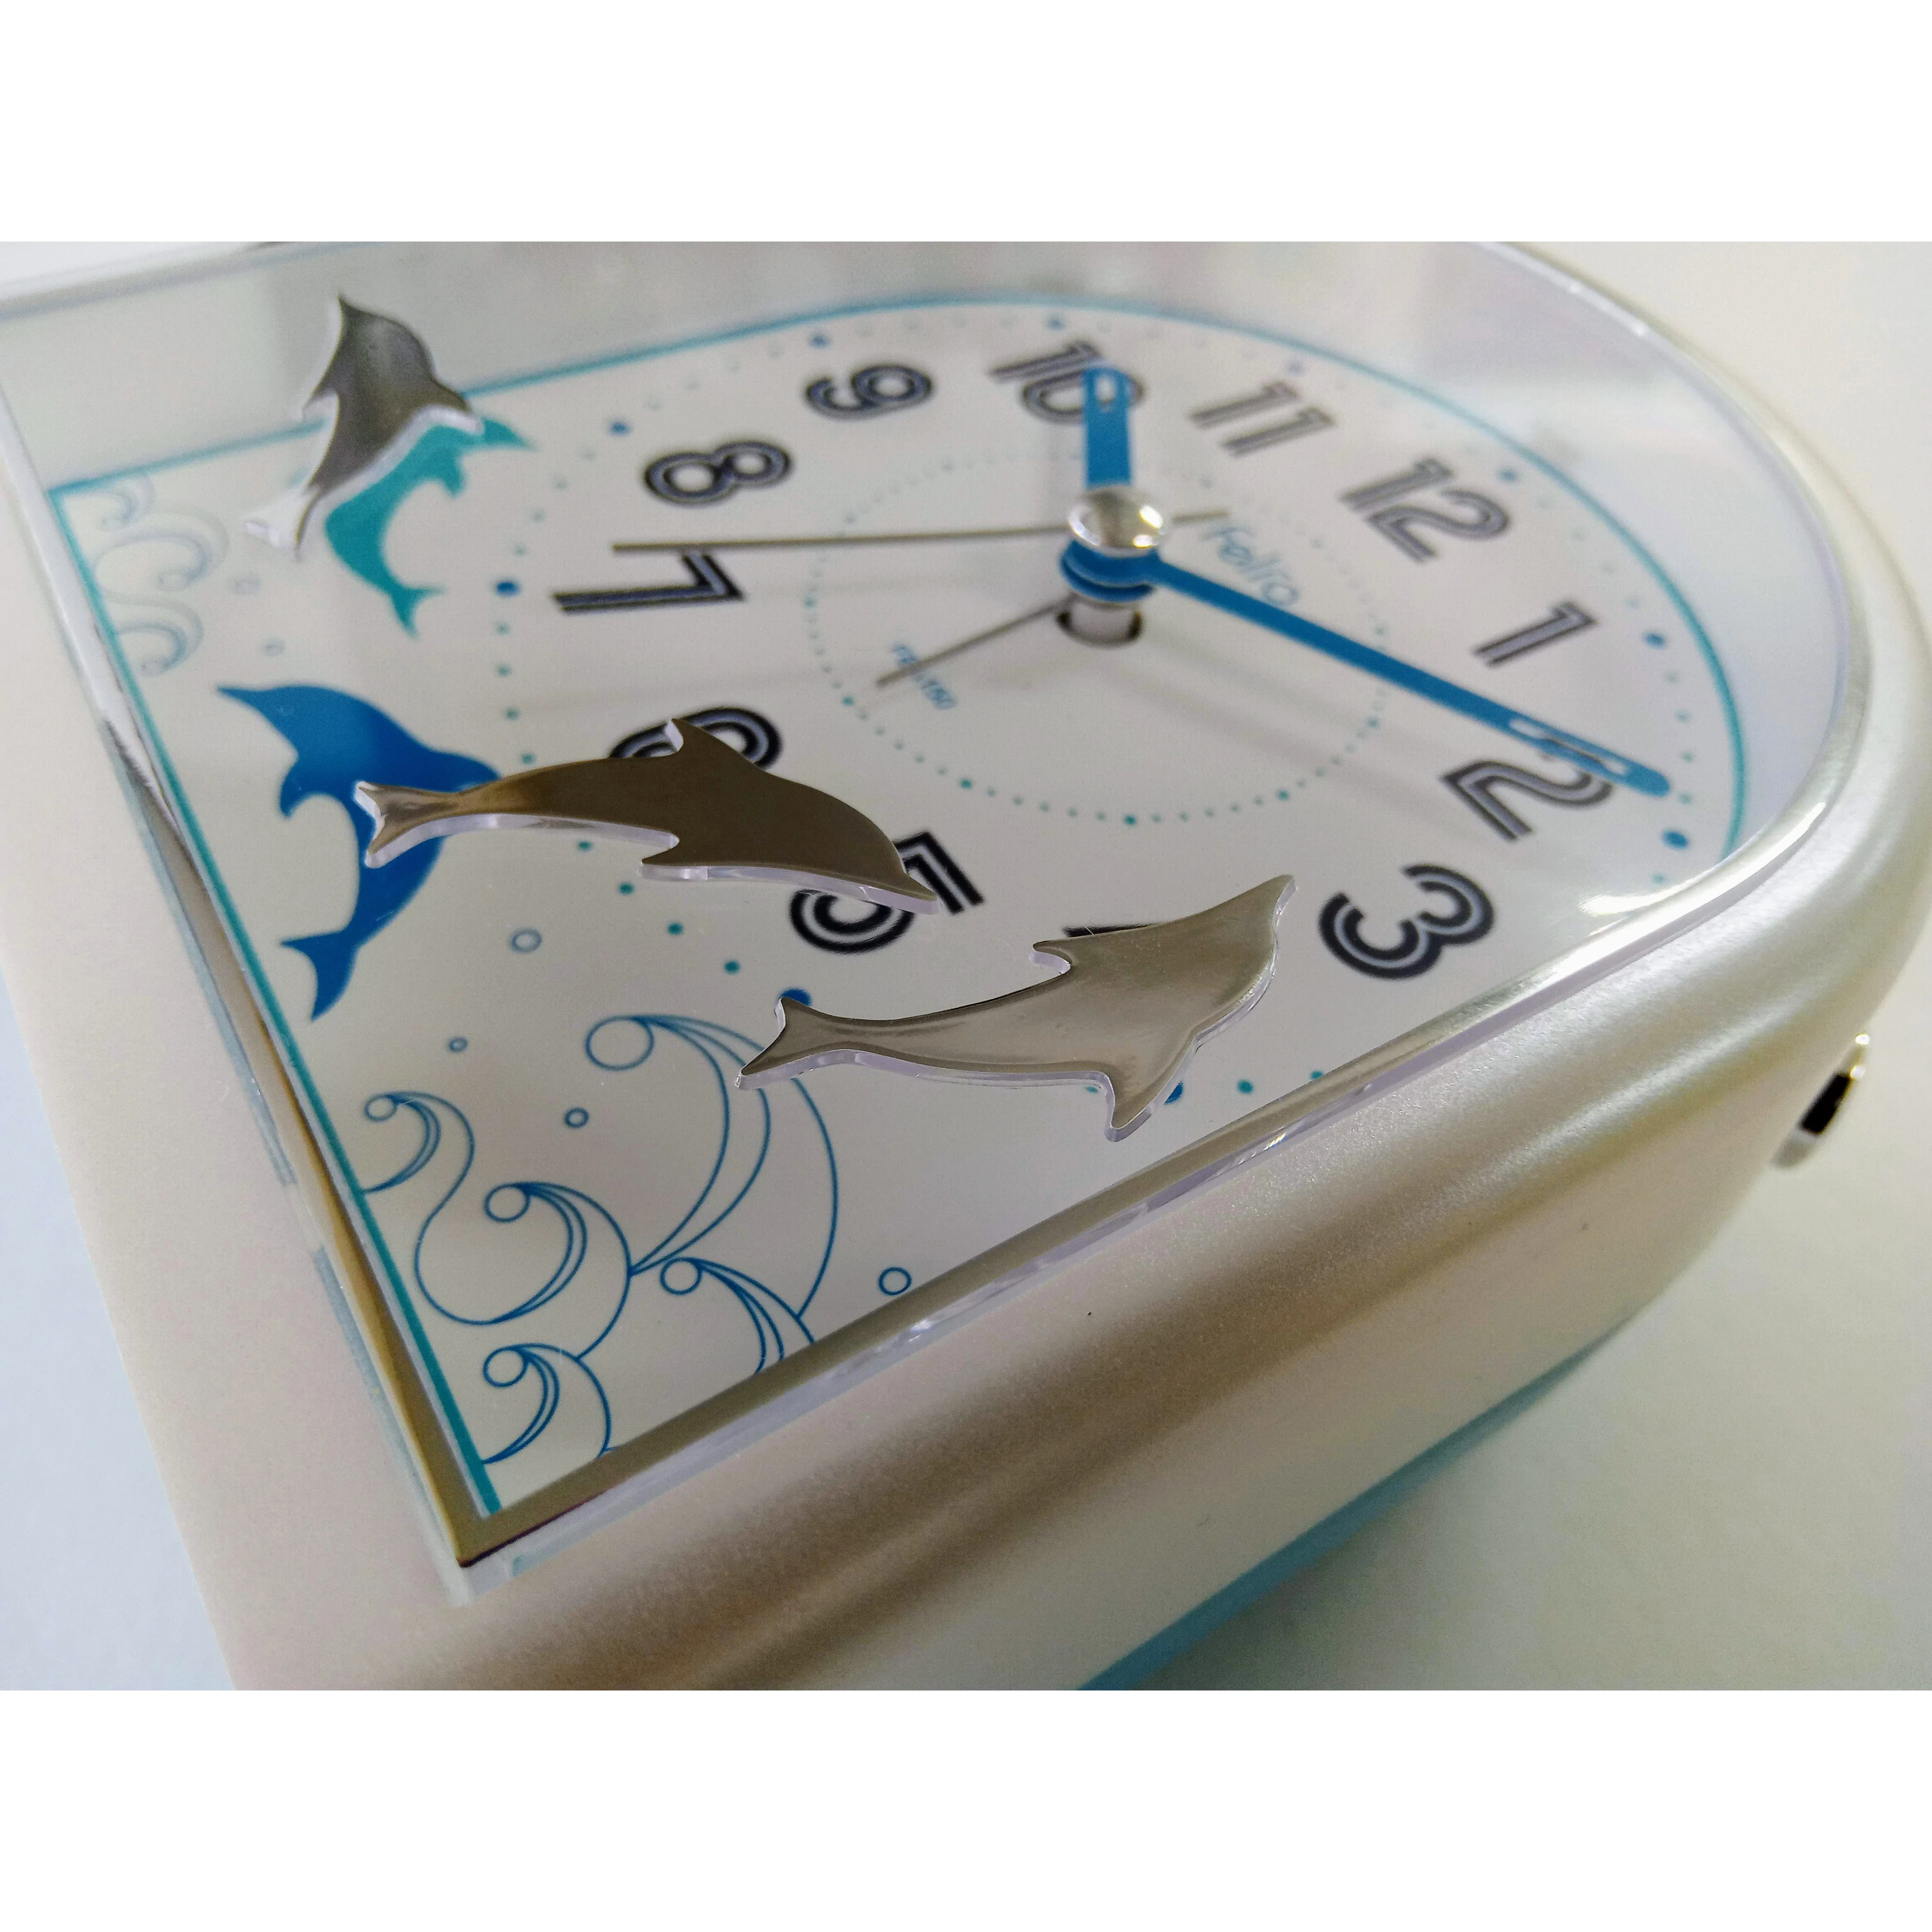 Blue color cute dolphin image decorative small desk and table clock